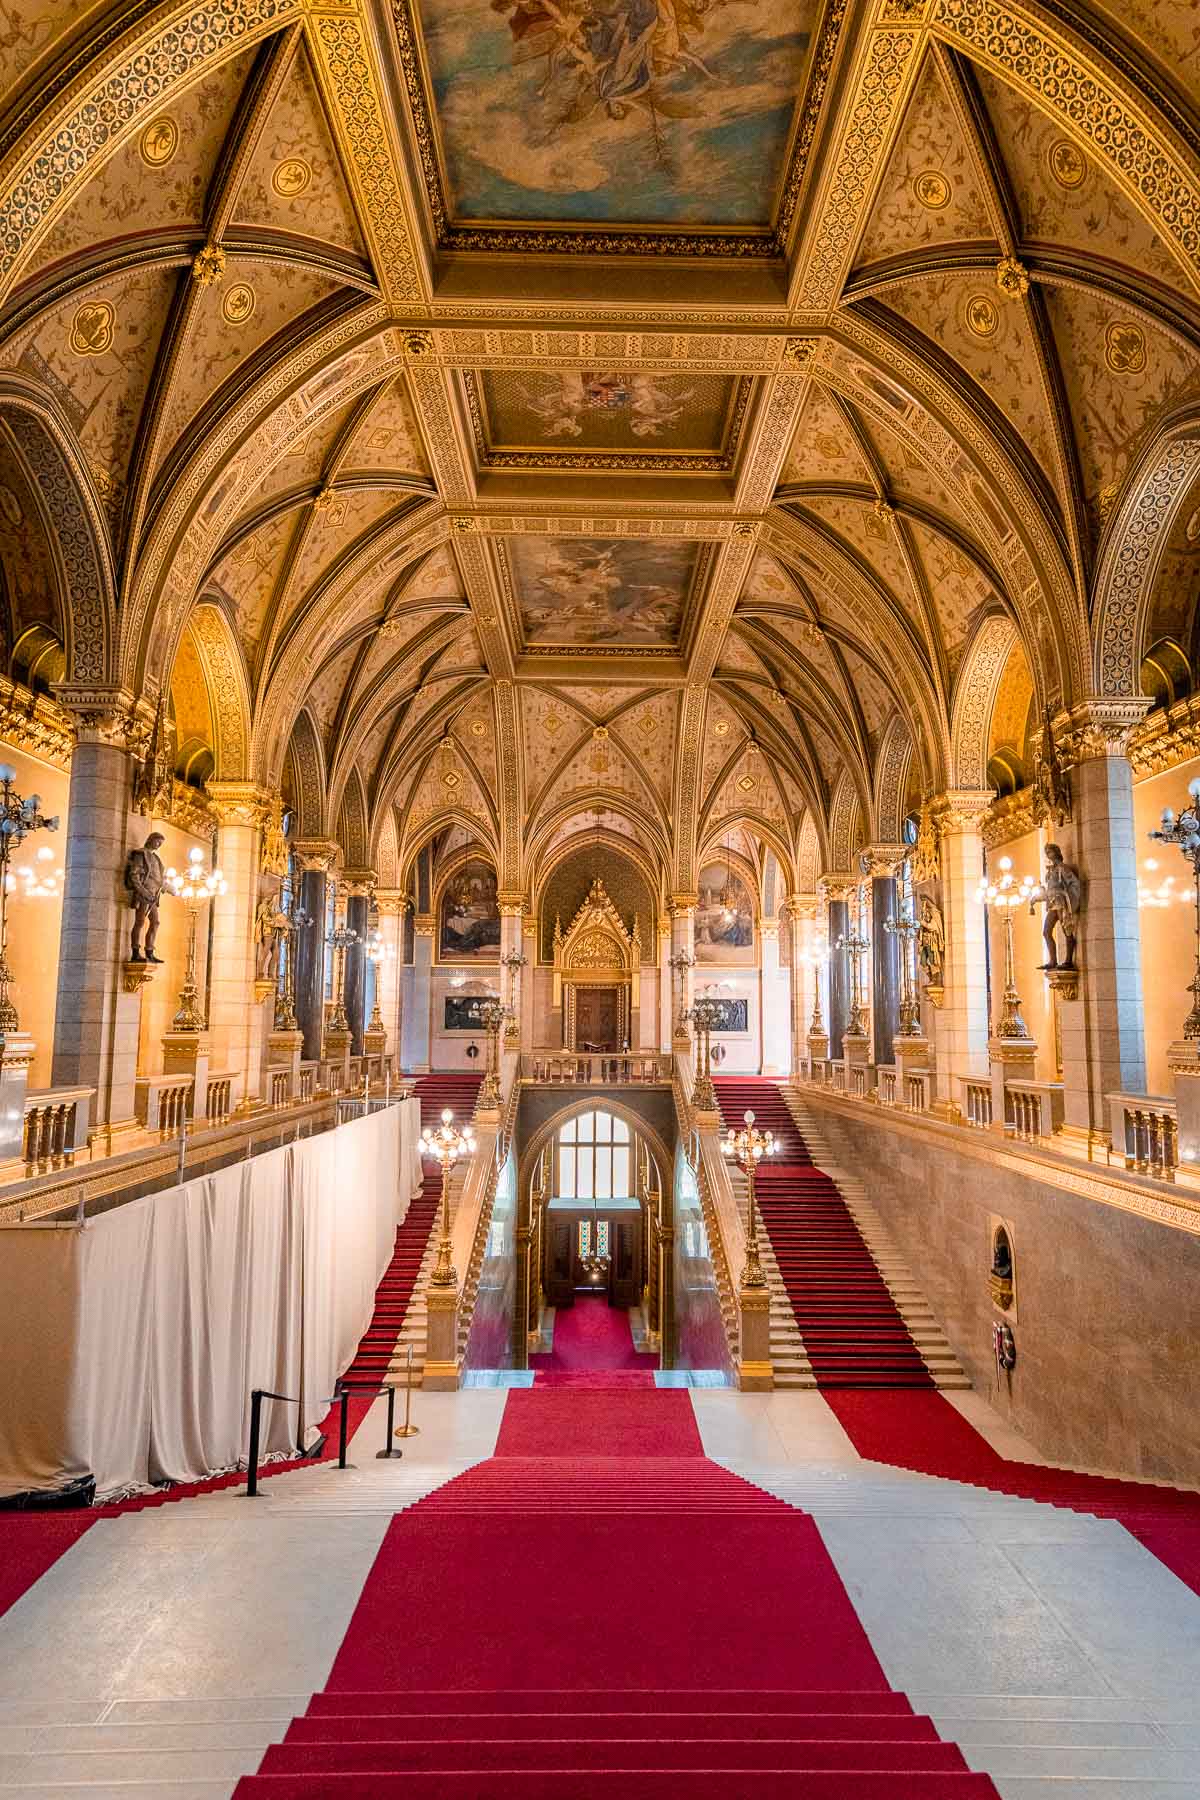 Interior of the Hungarian Parliament